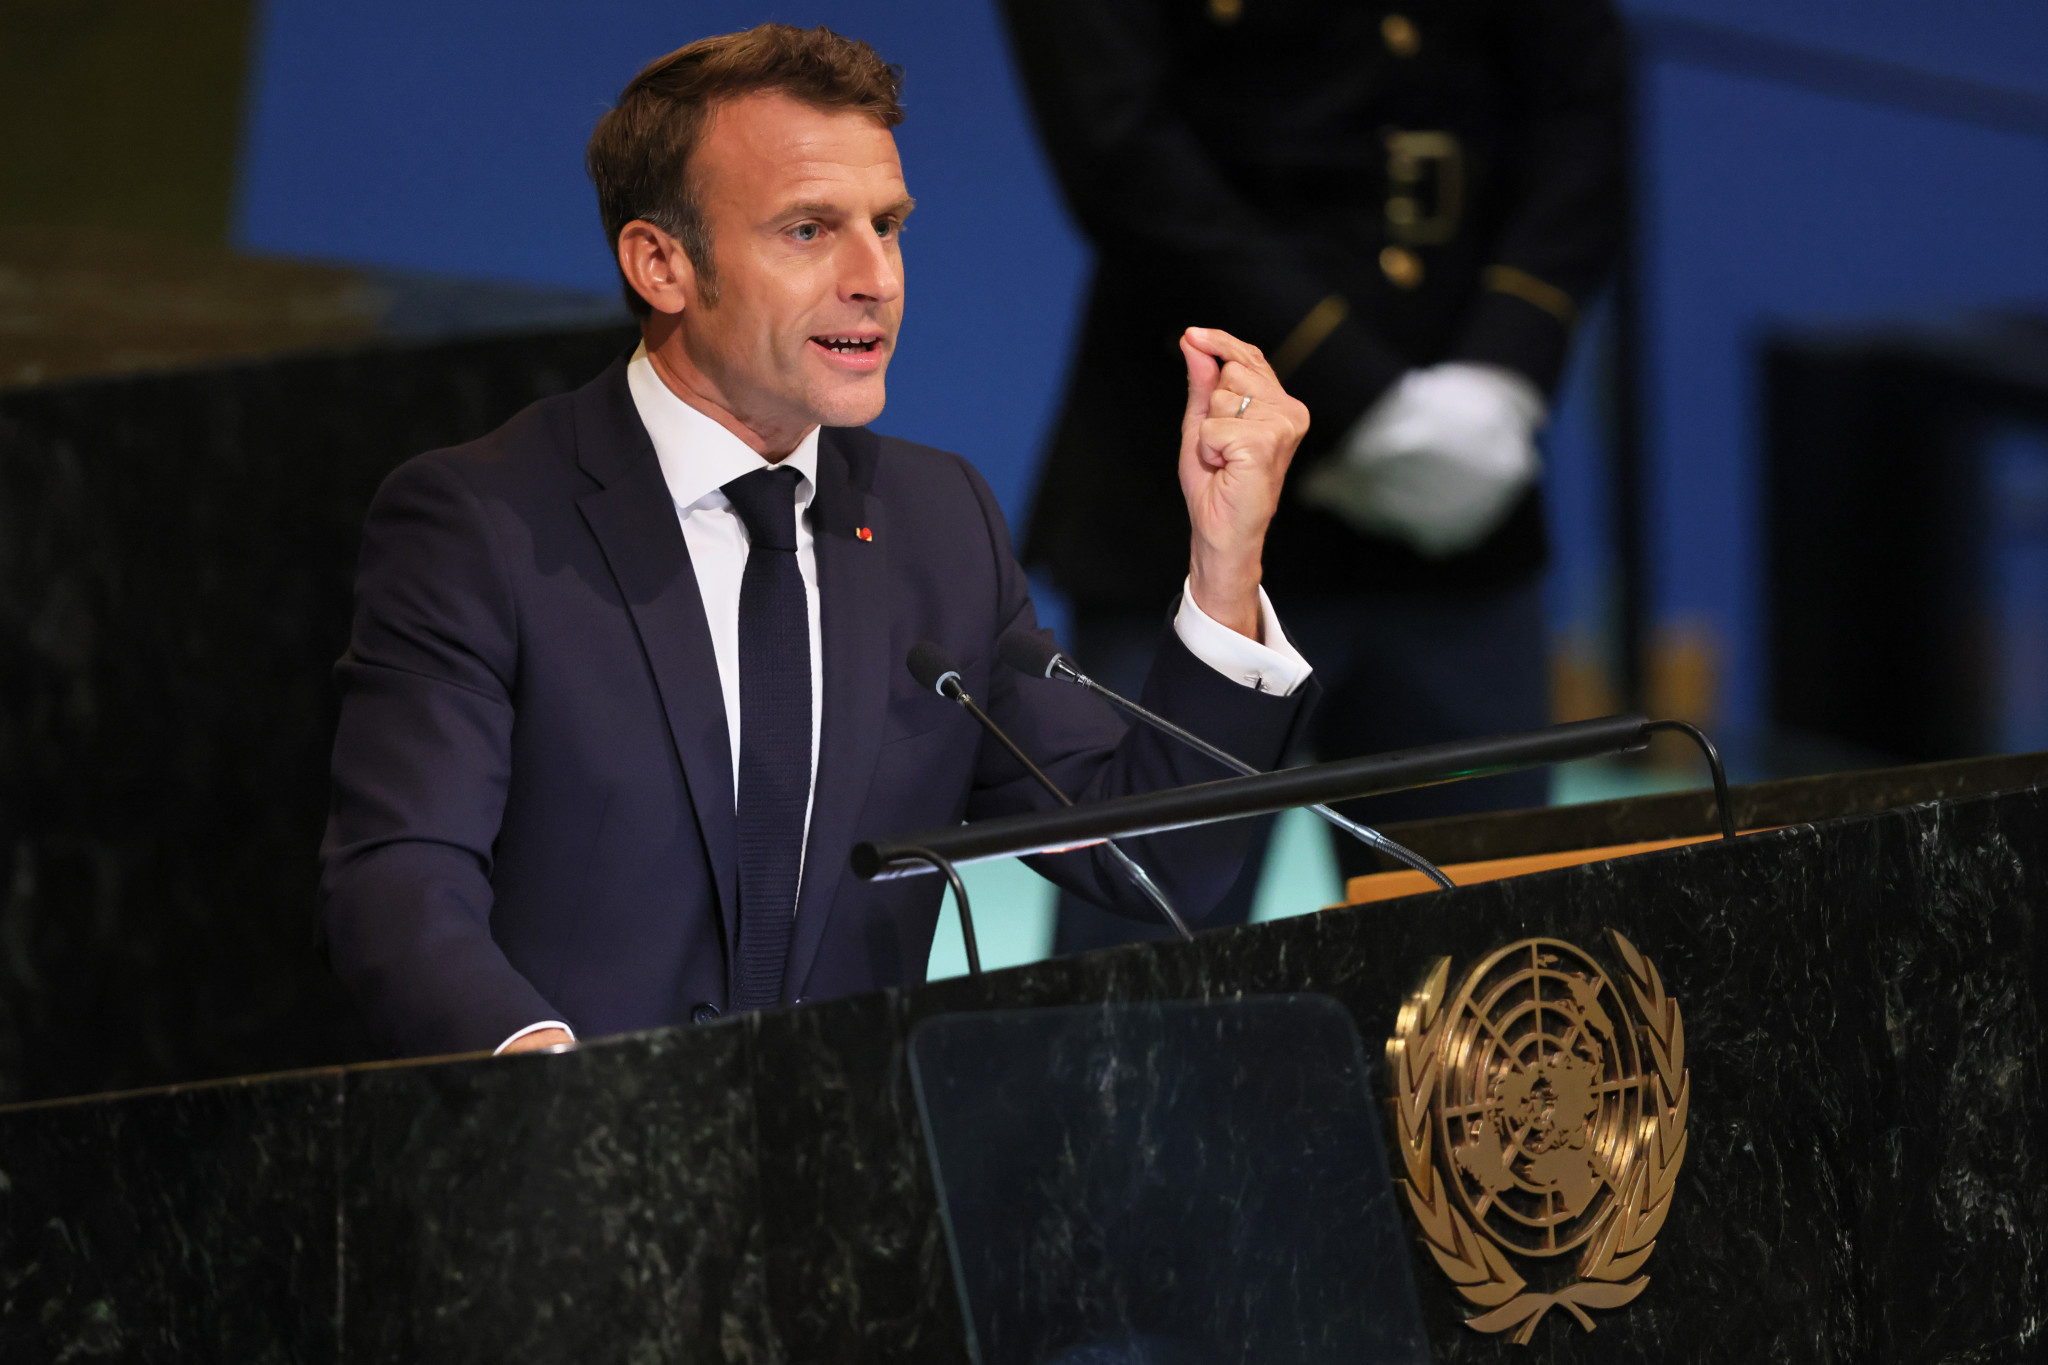 French President Emmanuel Macron is set to discuss preparations for Paris 2024 ©Getty Images